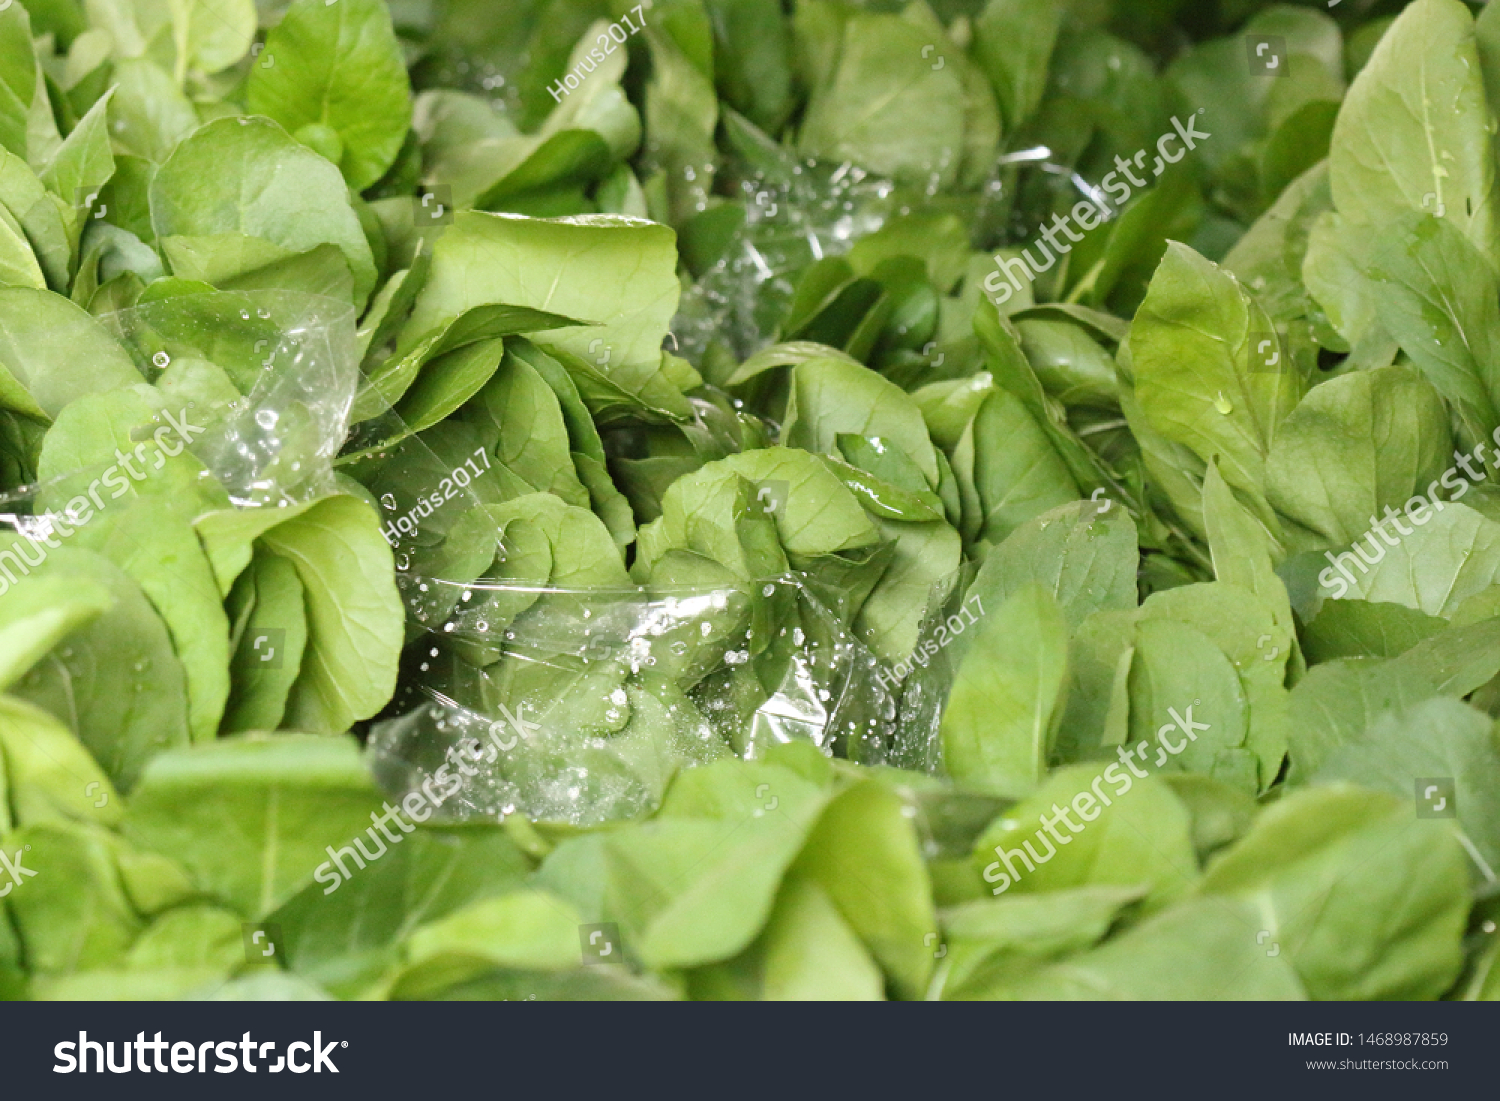 Download Fresh Green Salad Packed Plastic Bag Stock Photo Edit Now 1468987859 PSD Mockup Templates